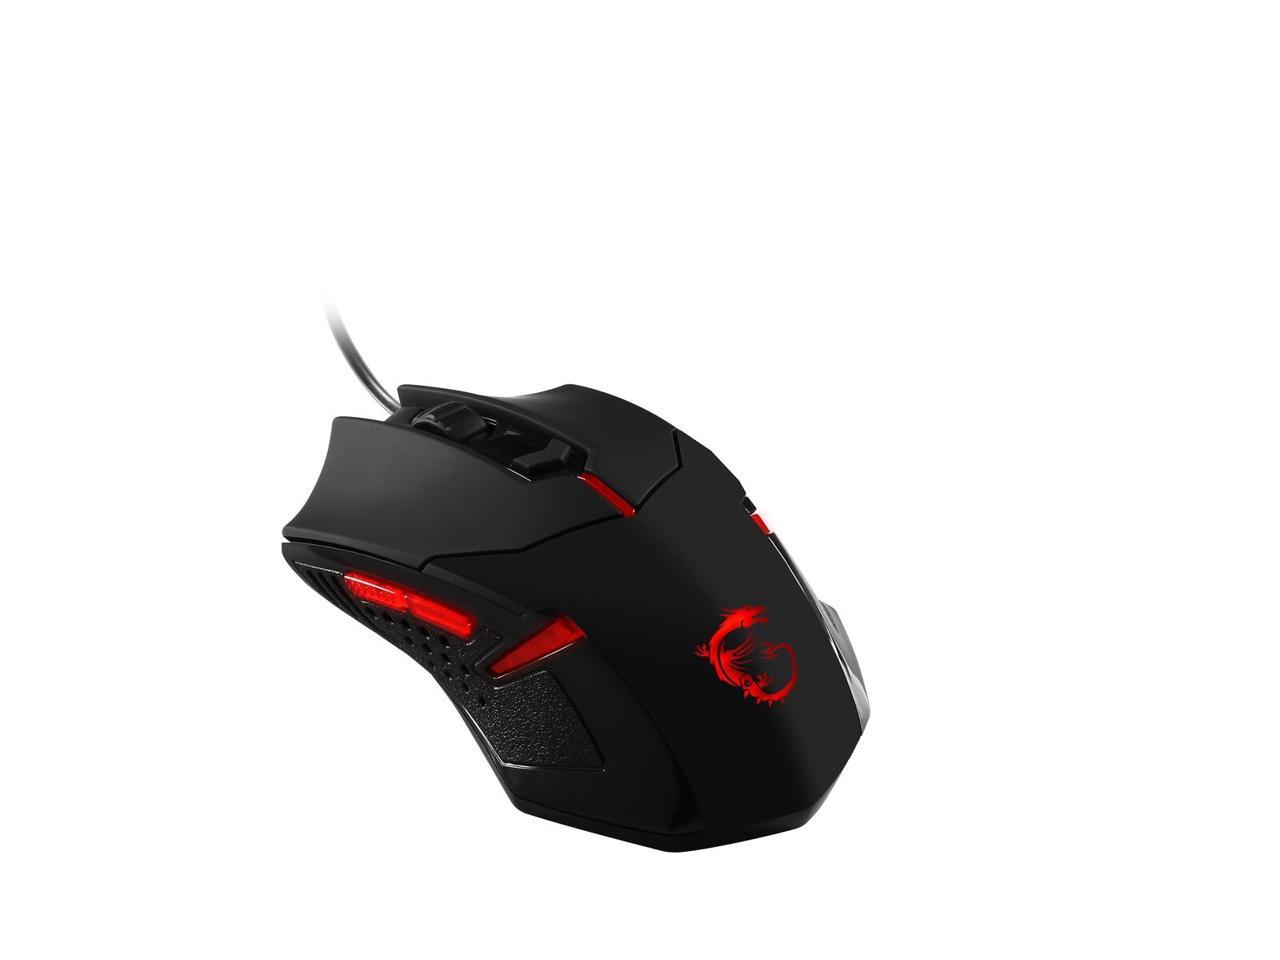 interceptor ds b1 gaming mouse driver download